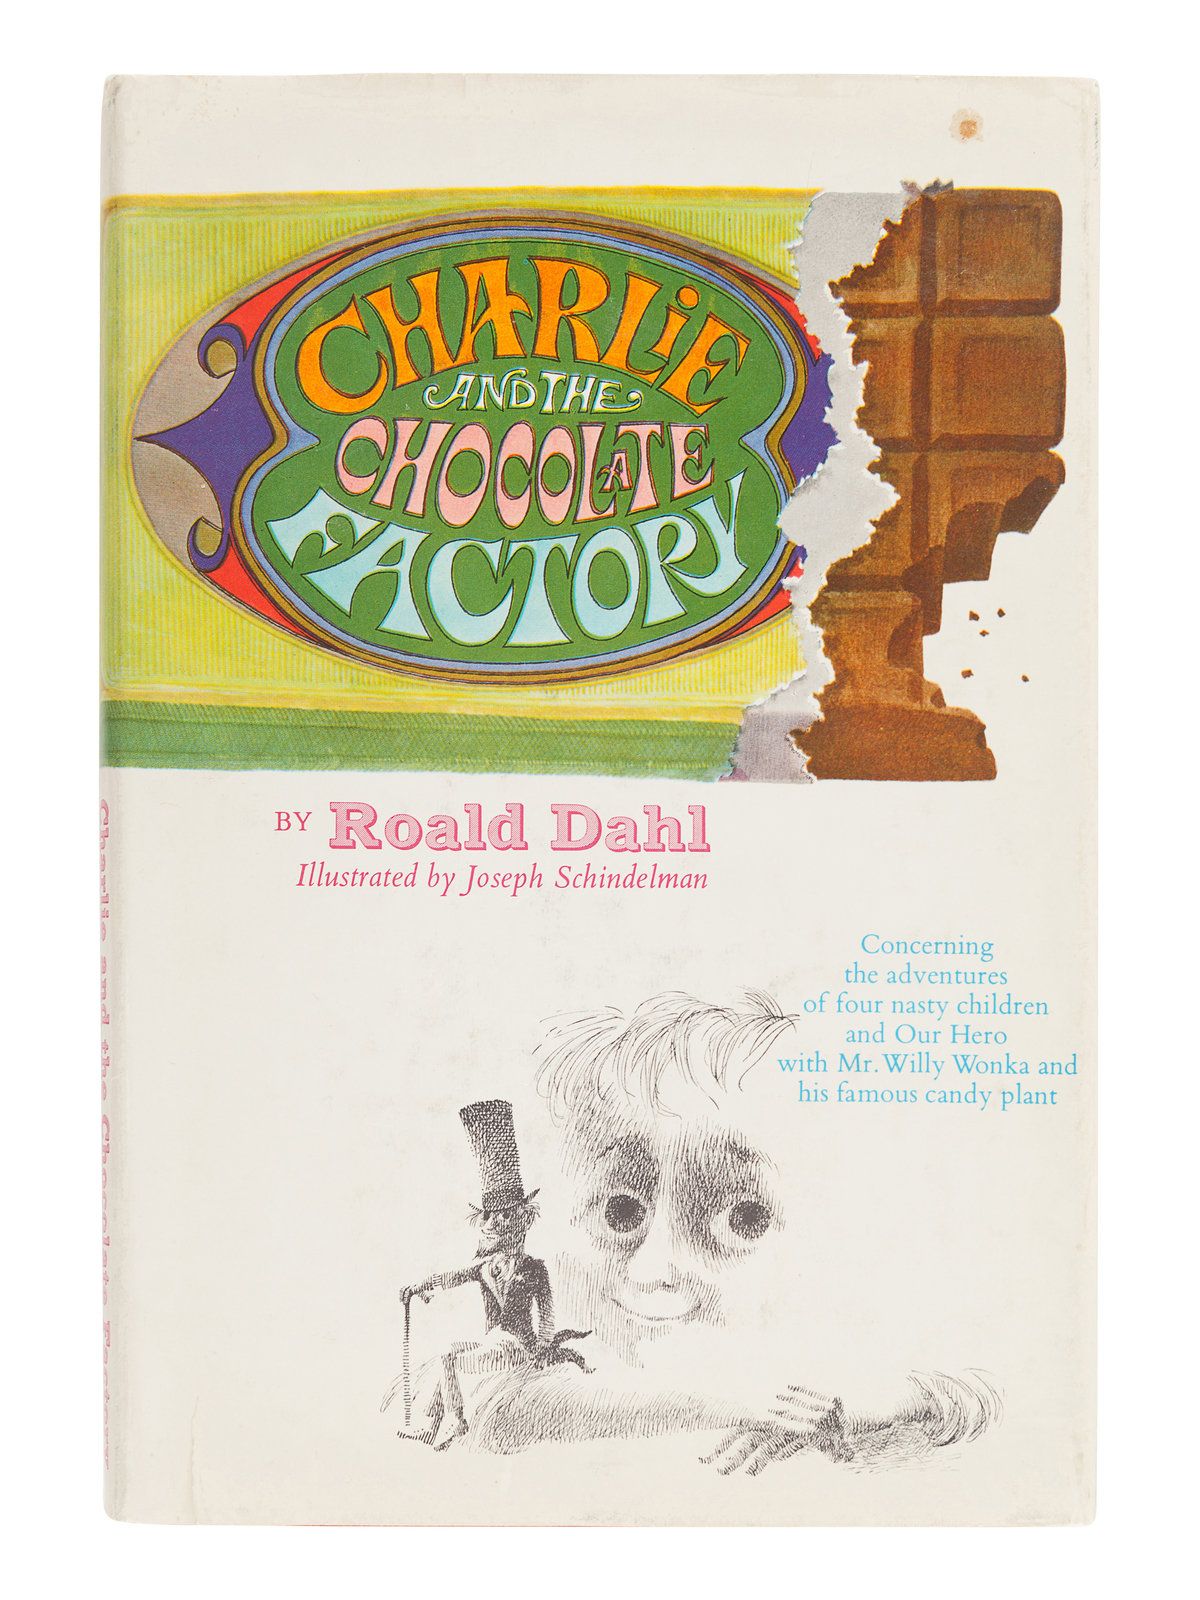 DAHL, Roald (1916-1990). Charlie and the Chocolate Factory. New York: Alfred A. Knopf, 1964. Image courtesy Hindman Auctions.